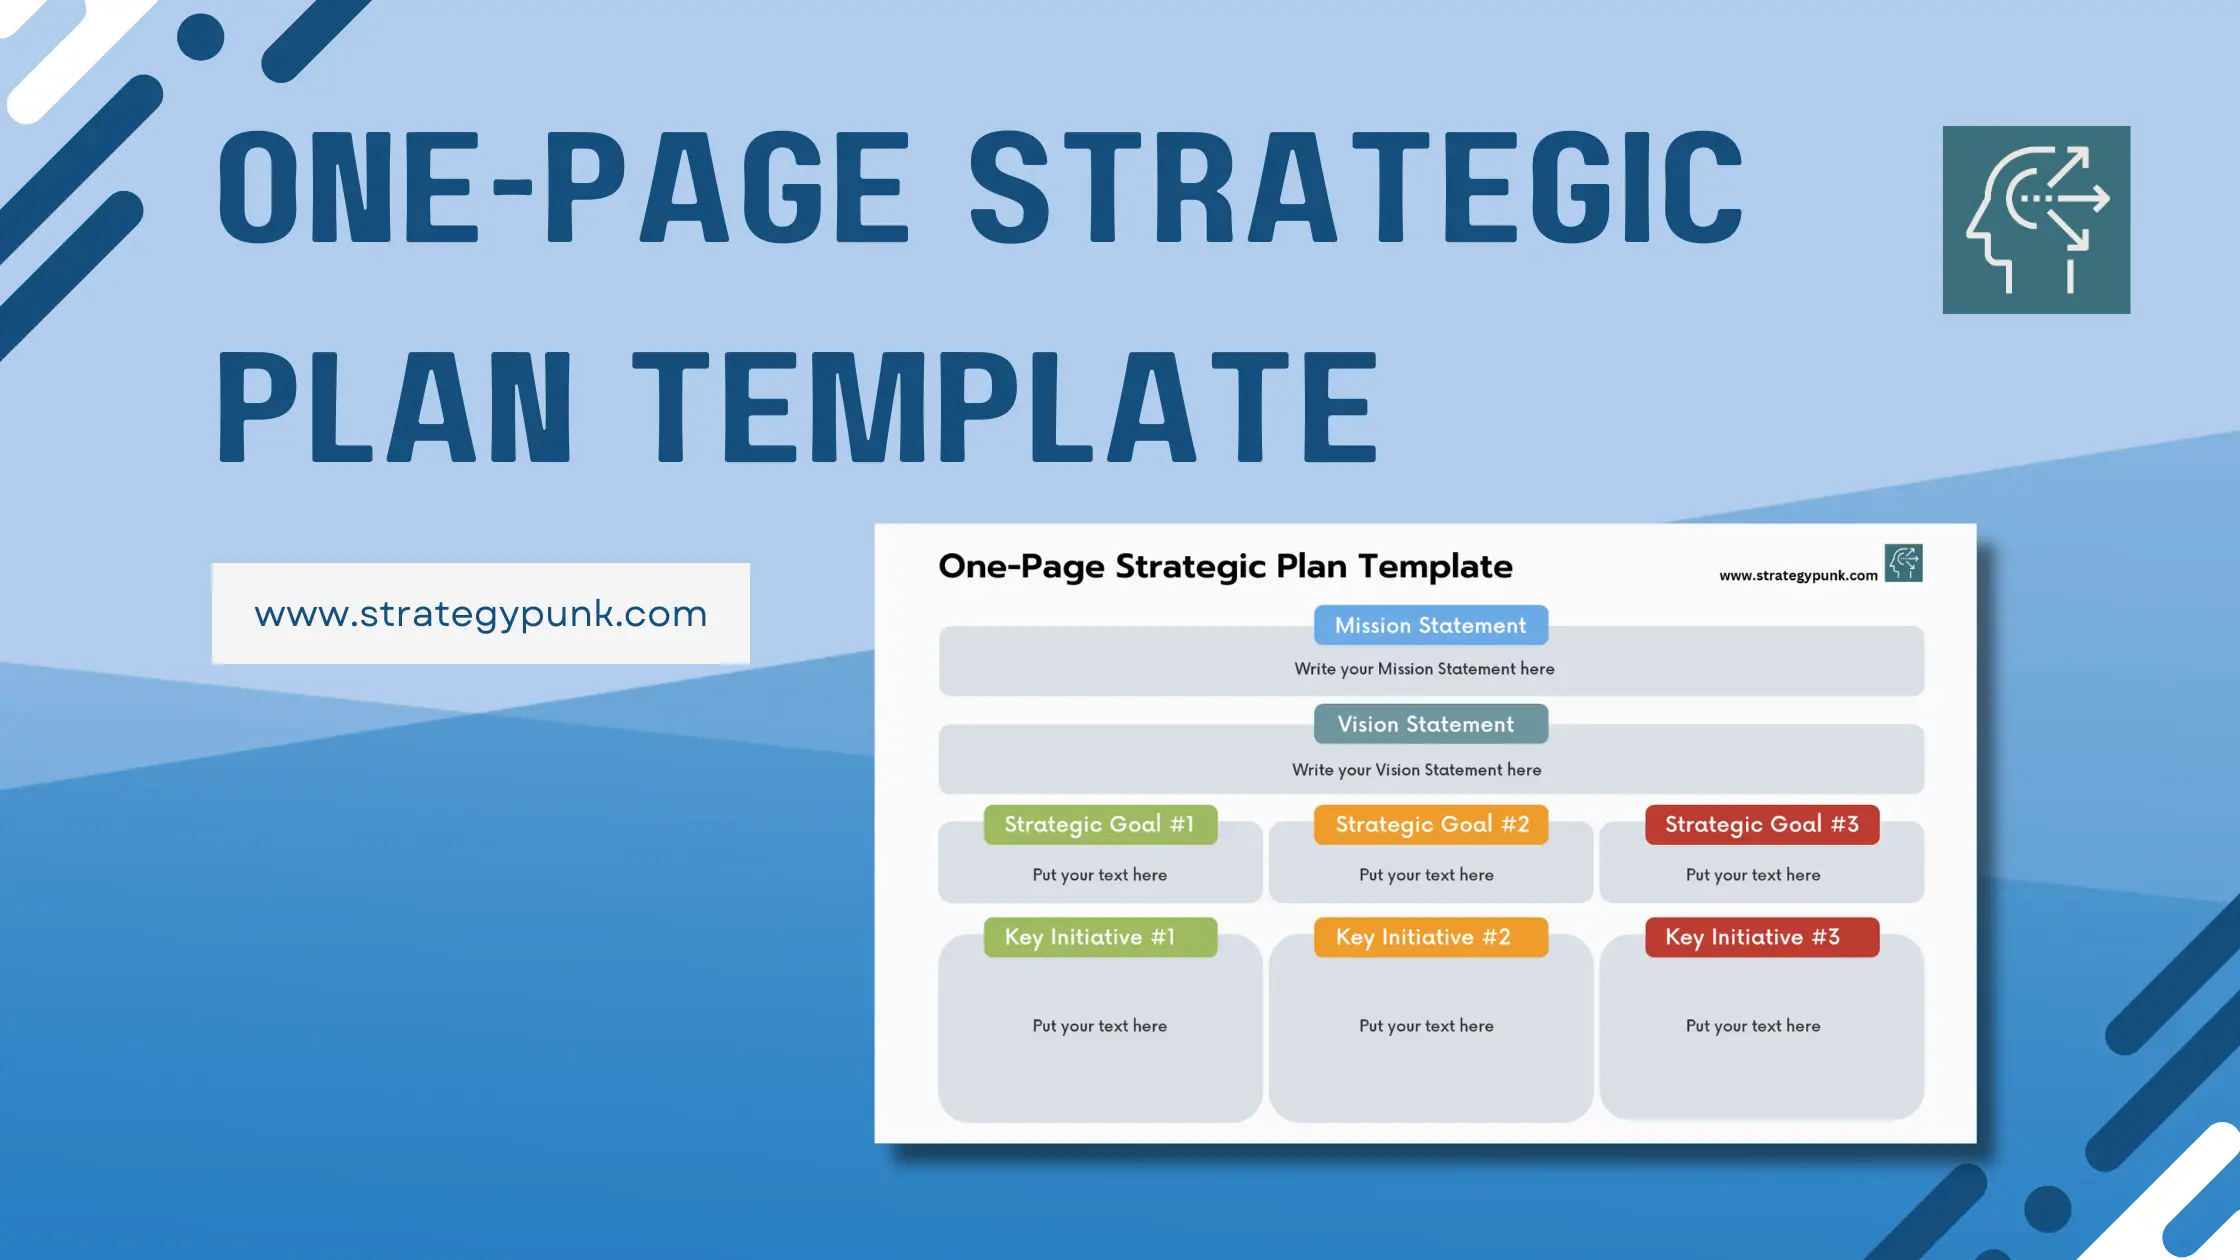 Introducing Our One-Page Strategic Plan Template (Free PPT)